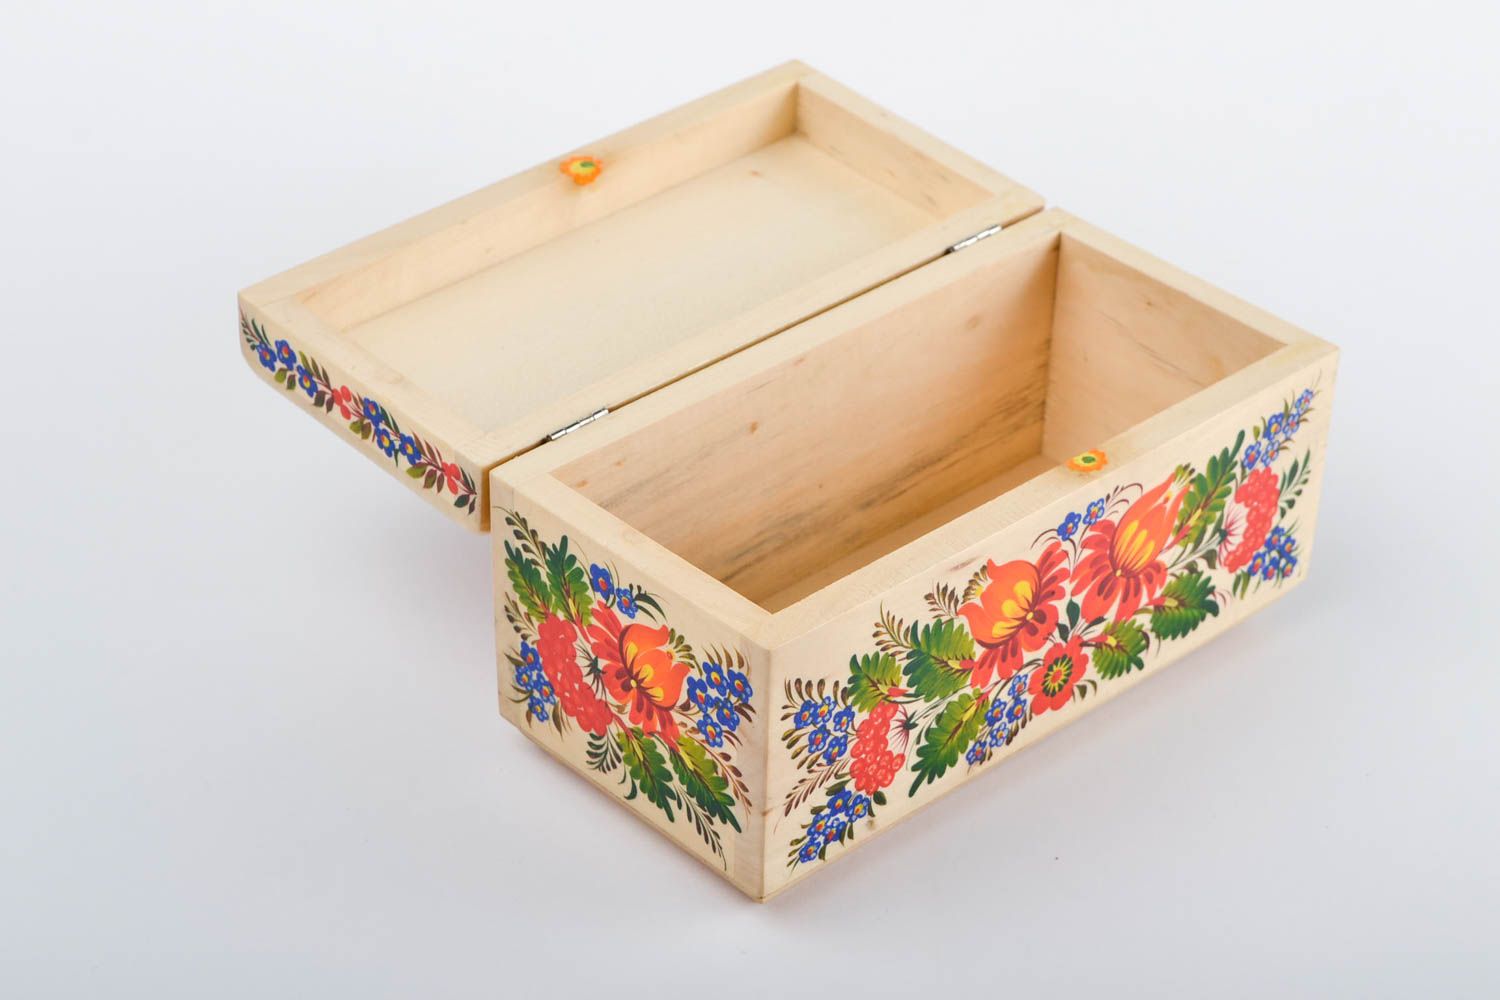 Handmade wooden jewelry box jewelry organizer folk arts and crafts gifts for her photo 4